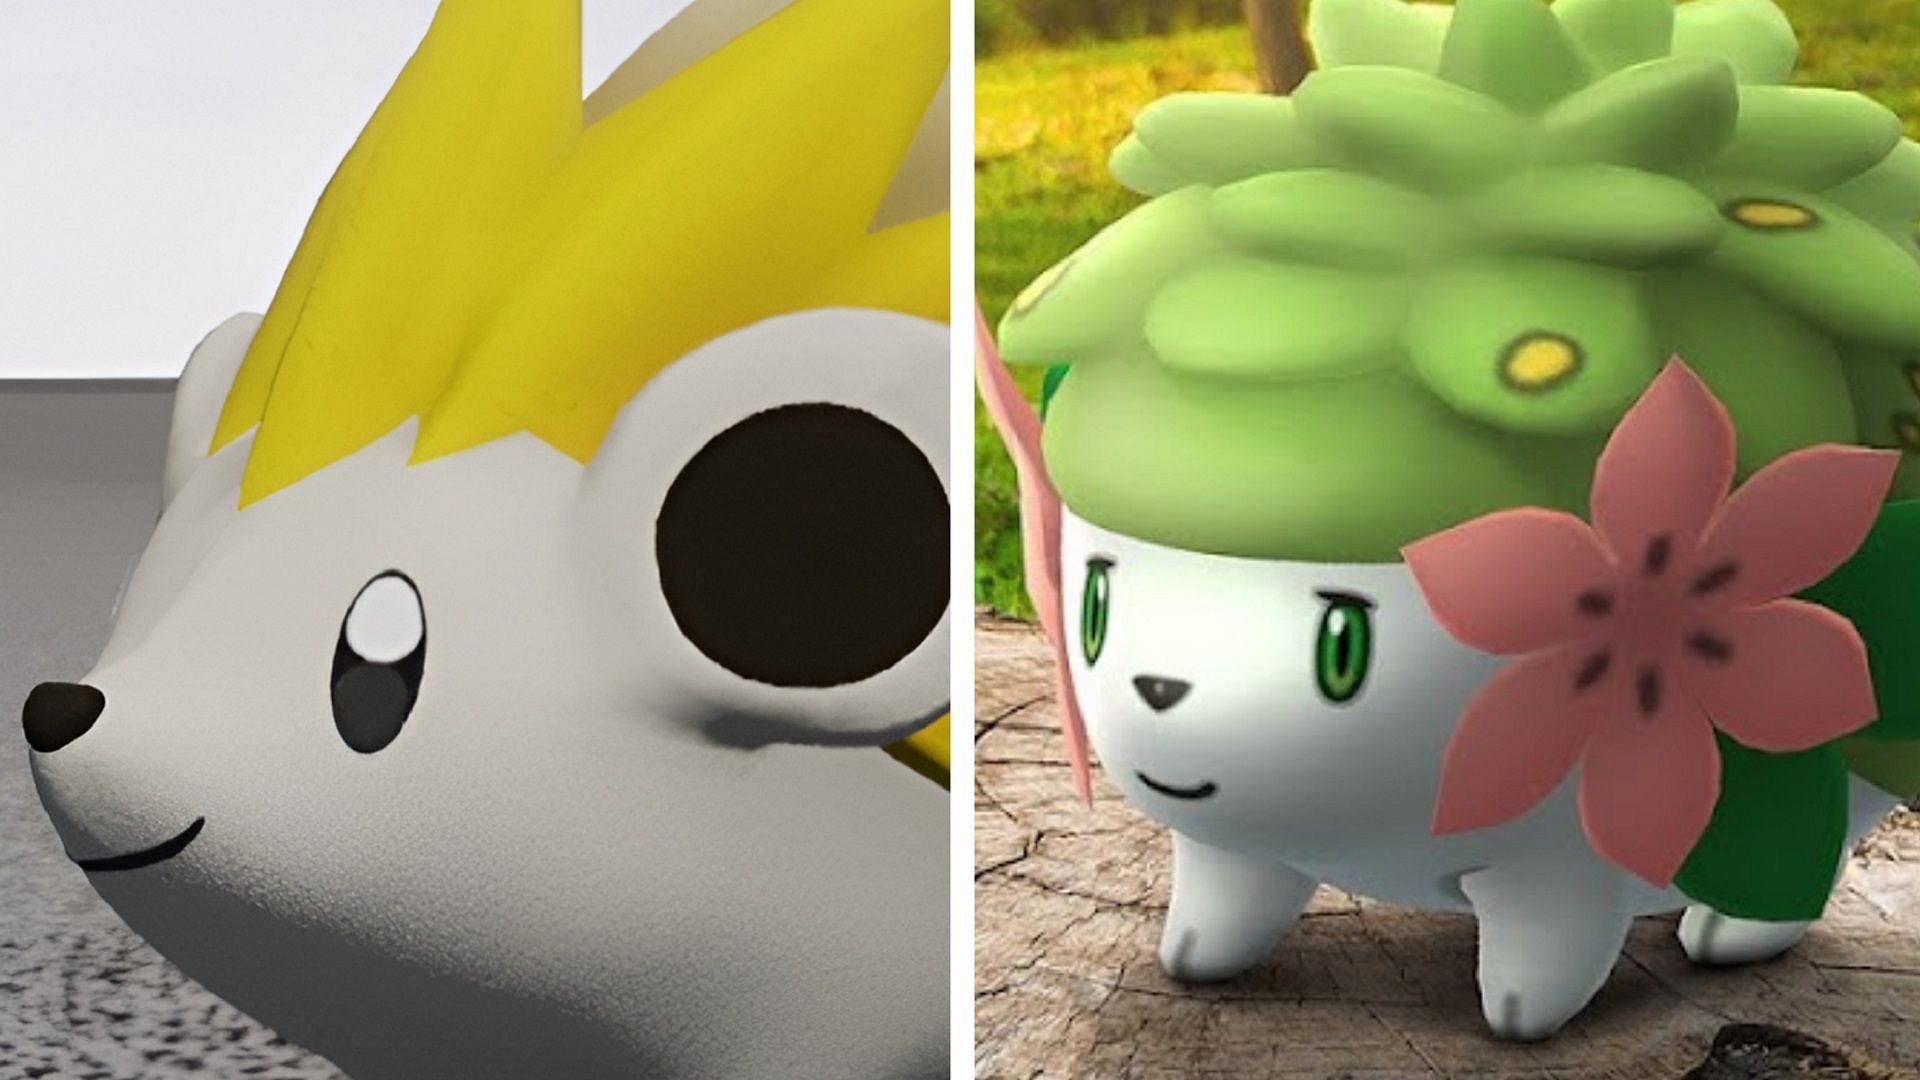 Jolthog and Shaymin seem to share a common design inspiration (Image via Pocketpair/Niantic)